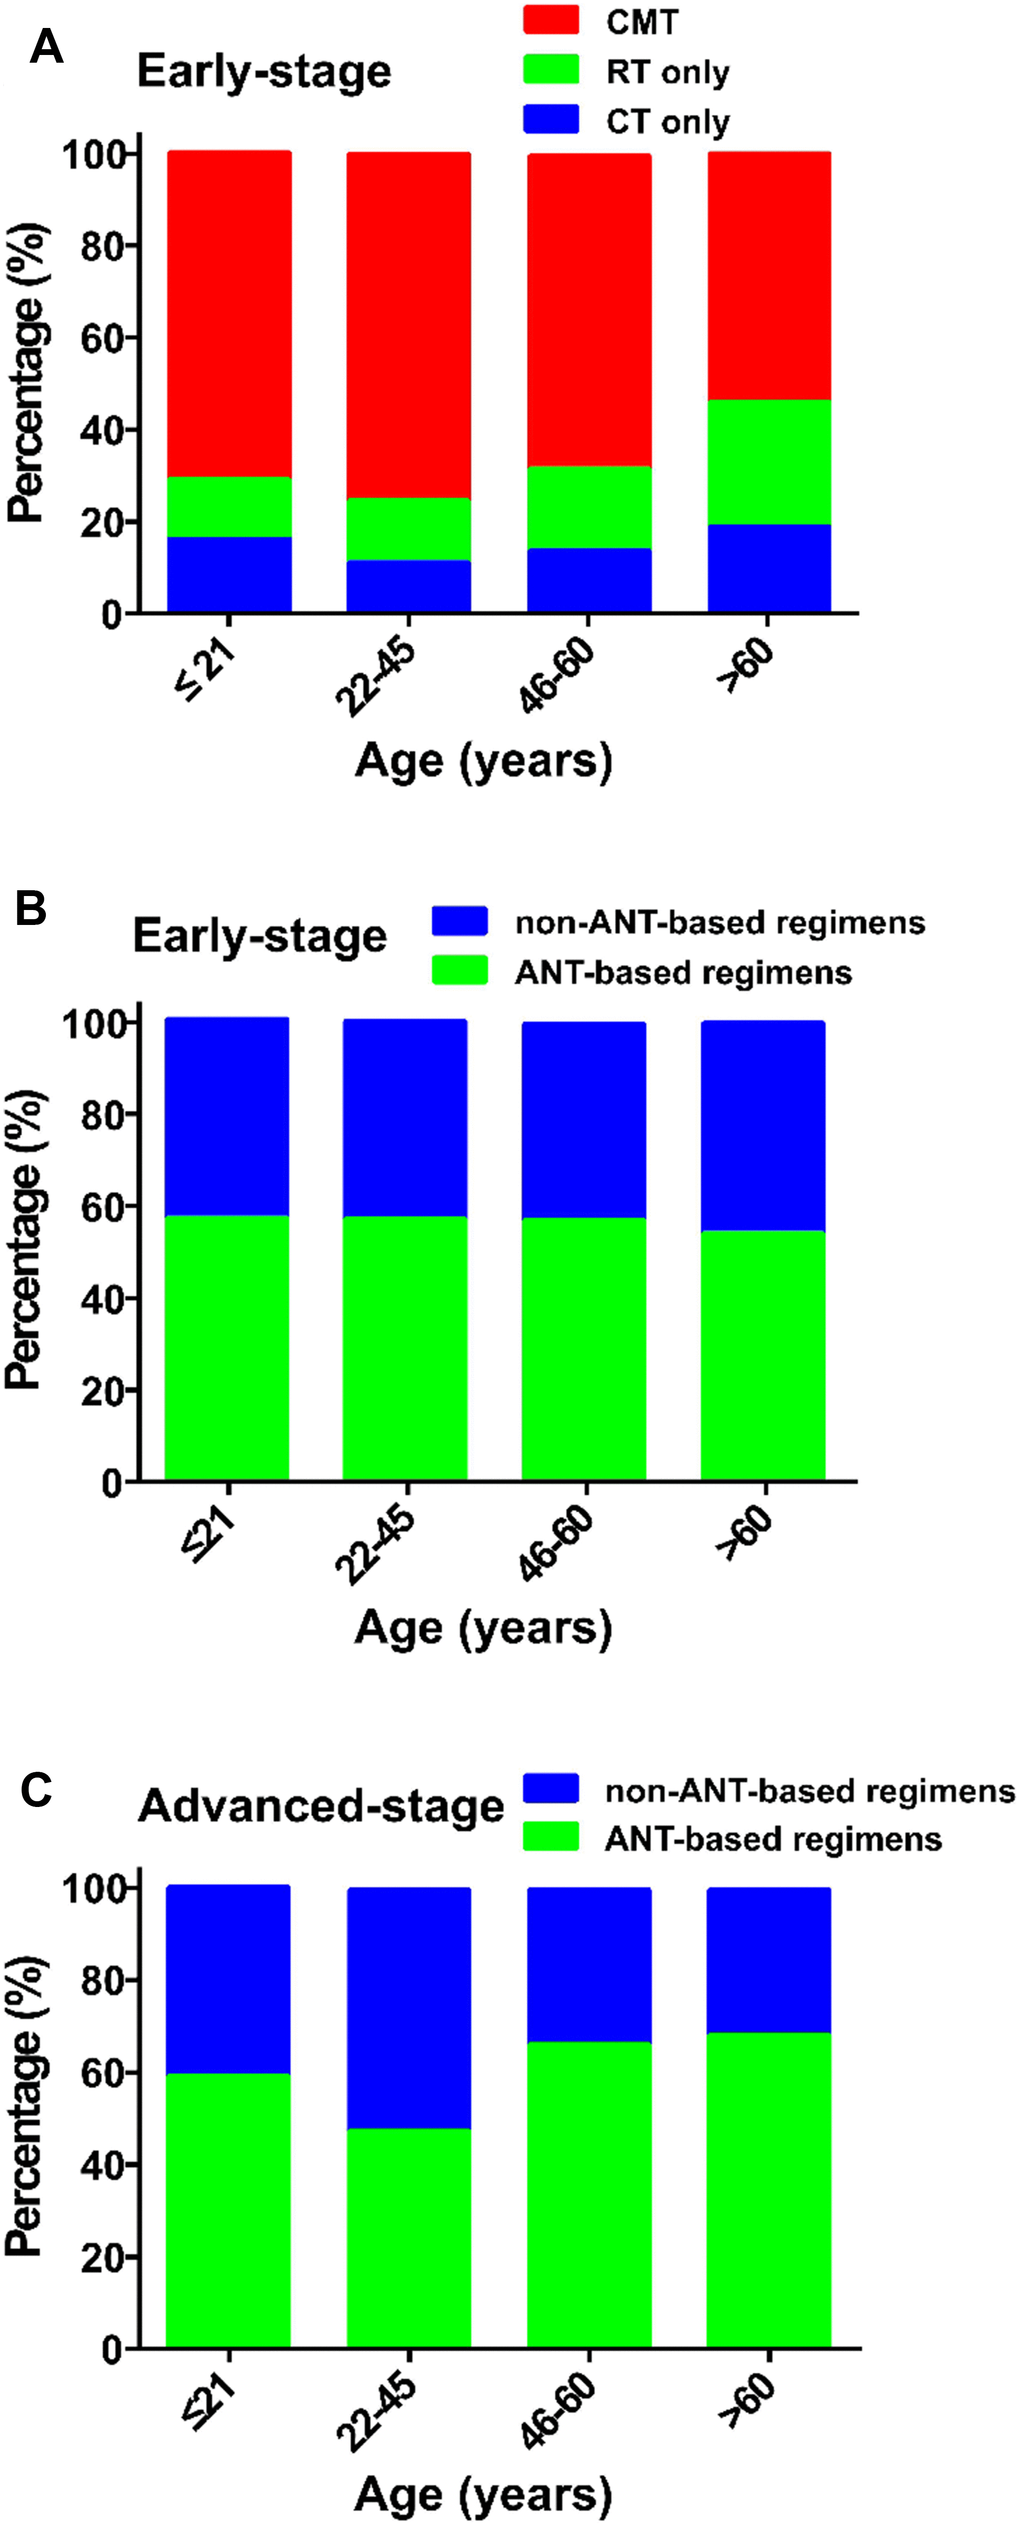 Treatment strategies in various age groups. (A) early-stage patients treated with CMT, RT or CT; (B) early-stage patients treated with a non-ANT-based or ANT-based regimens; and (C) advanced-stage patients treated with a non-ANT-based or ANT-based regimens. CMT, combined modality therapy; RT, radiotherapy; CT, chemotherapy; ANT, anthracycline.